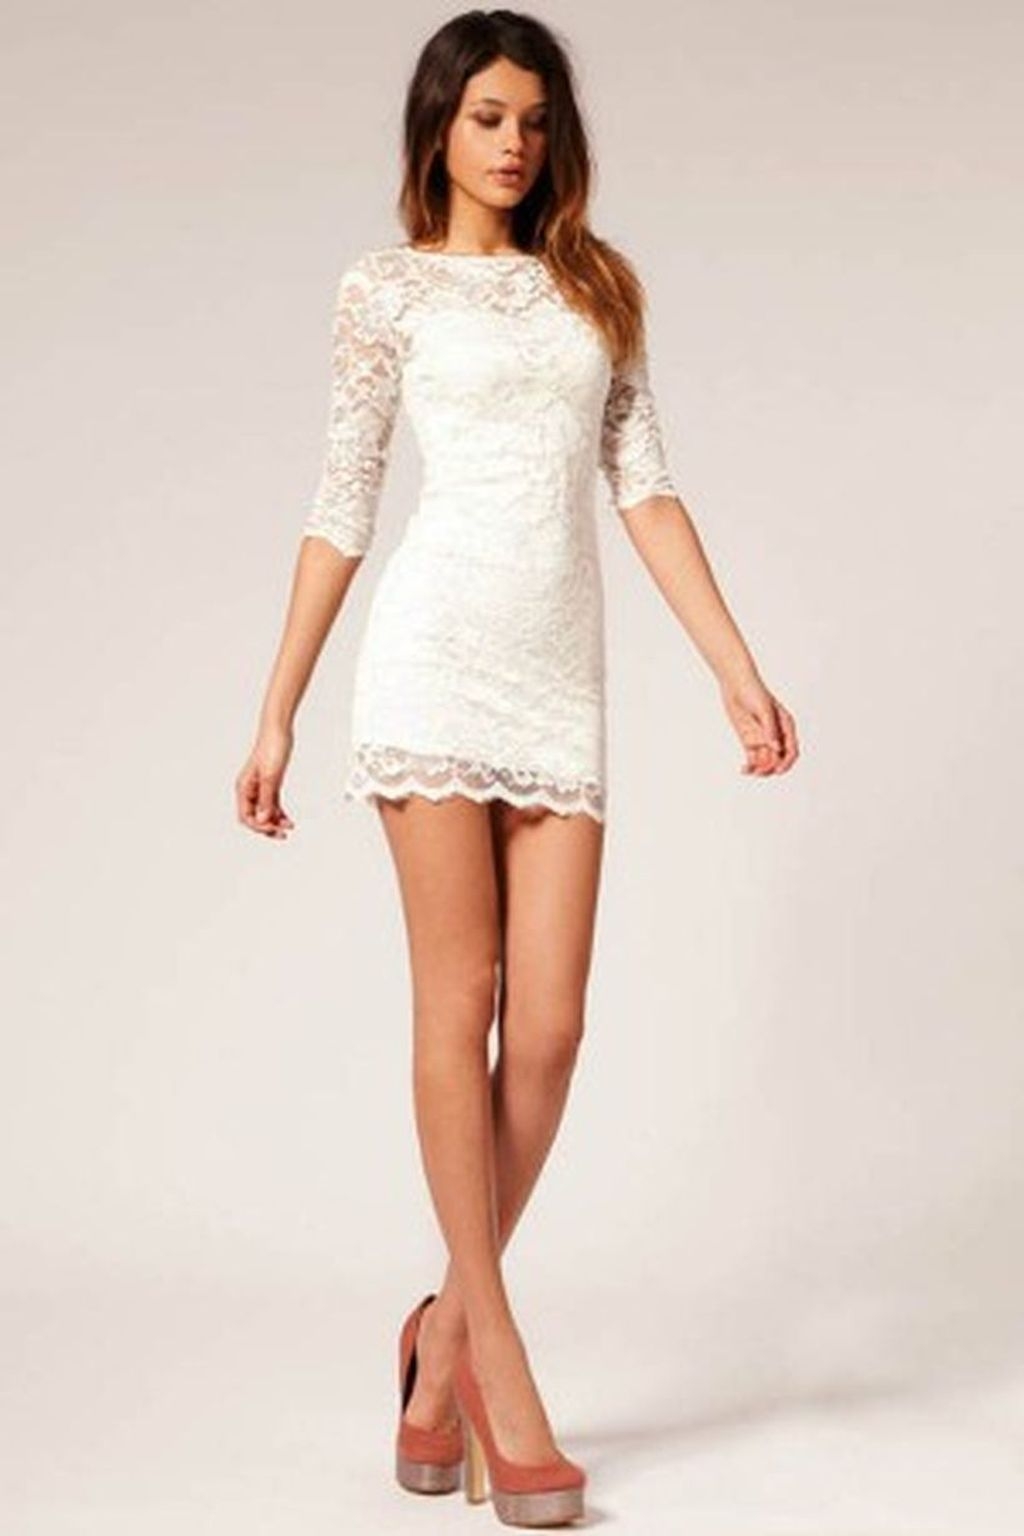 White dress outfit for girls women